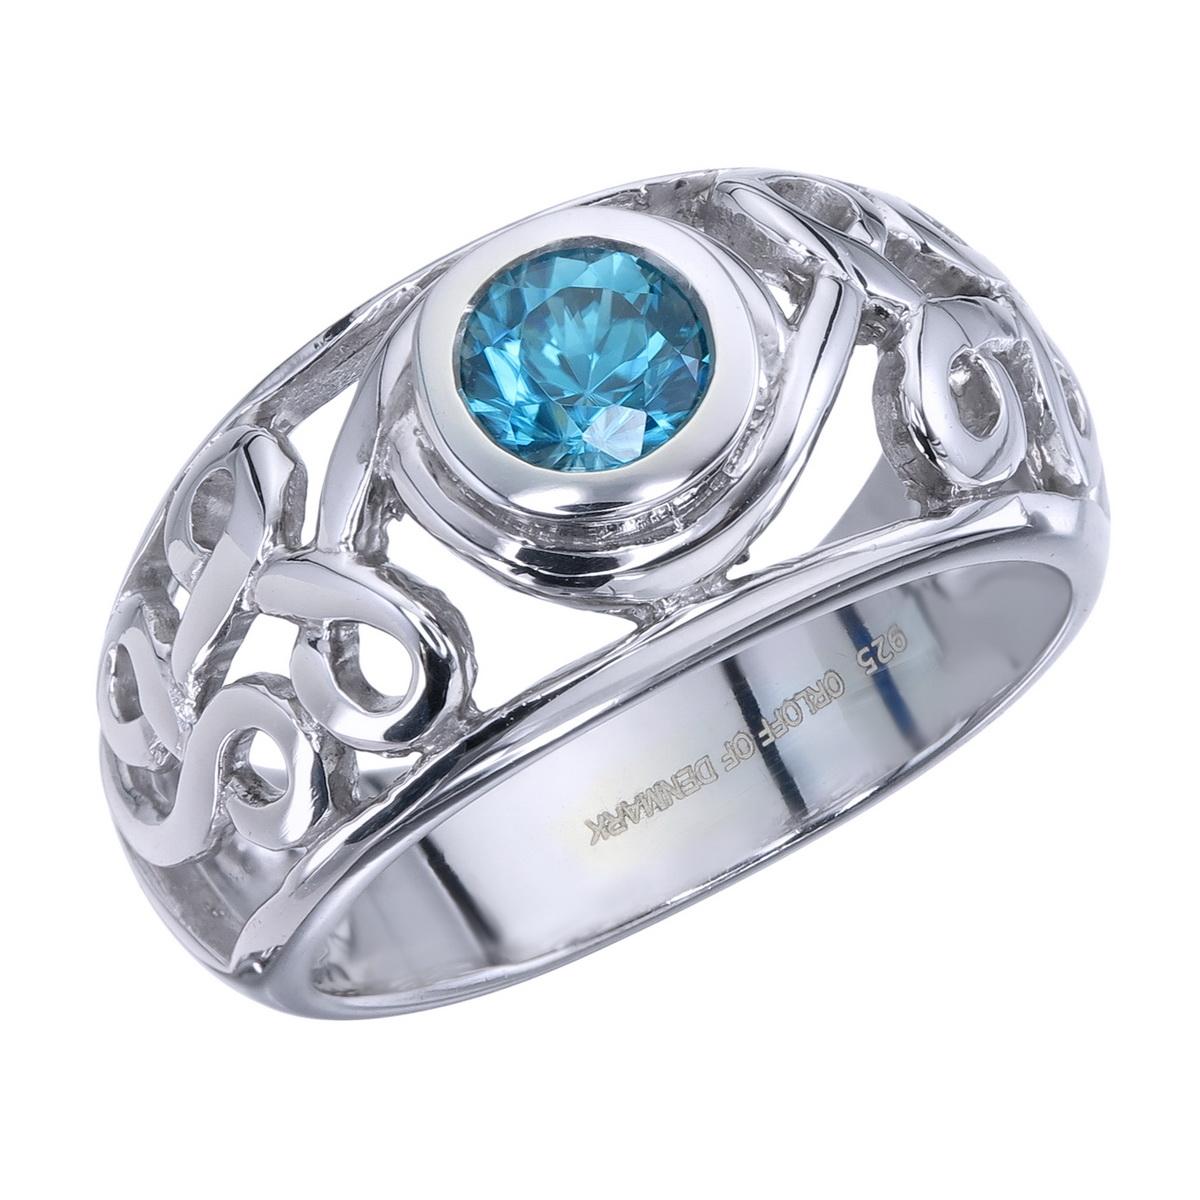 Orloff of Denmark; 1.20 carat Ocean Blue Zircon set in a Solitaire 925 Sterling Silver Ring.

Featured on this peace is a natural blue zircon mined in Ratanakiri, Cambodia and later re-cut in Bangkok, Thailand.
The unique blue of the zircon